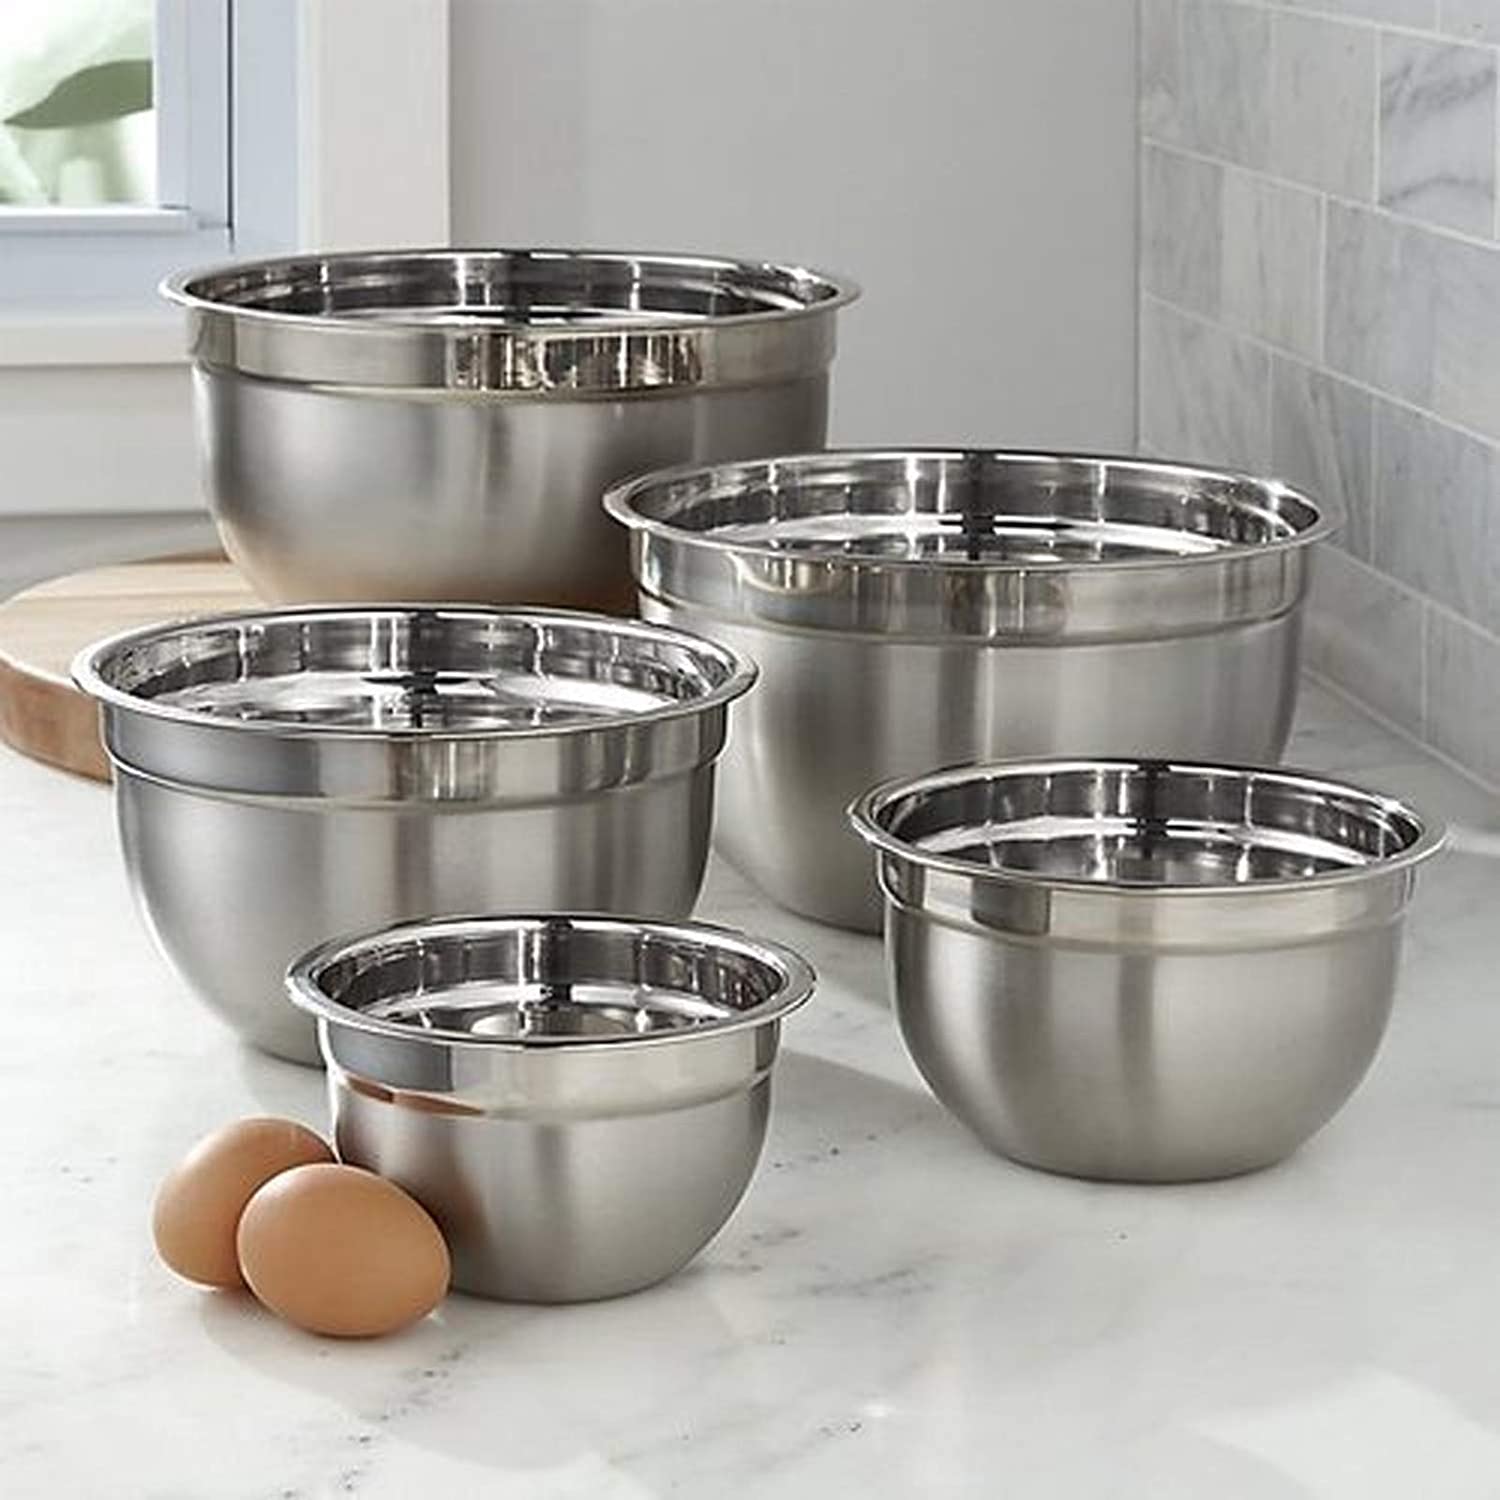 Taluka Serving Bowl Stainless Steel Round Lid Bowl/Box/Kitchen Food Storage Containers, Tiffin, Lunch Box, Stainless Steel Lid Bowl - Set of 5 Steel Mixing Bowl (Sizes- 14 cm, 18 cm, 22 cm, 26 cm, 30 cm) Pack of 5 Pcs Stainless Steel Disposable Mixin